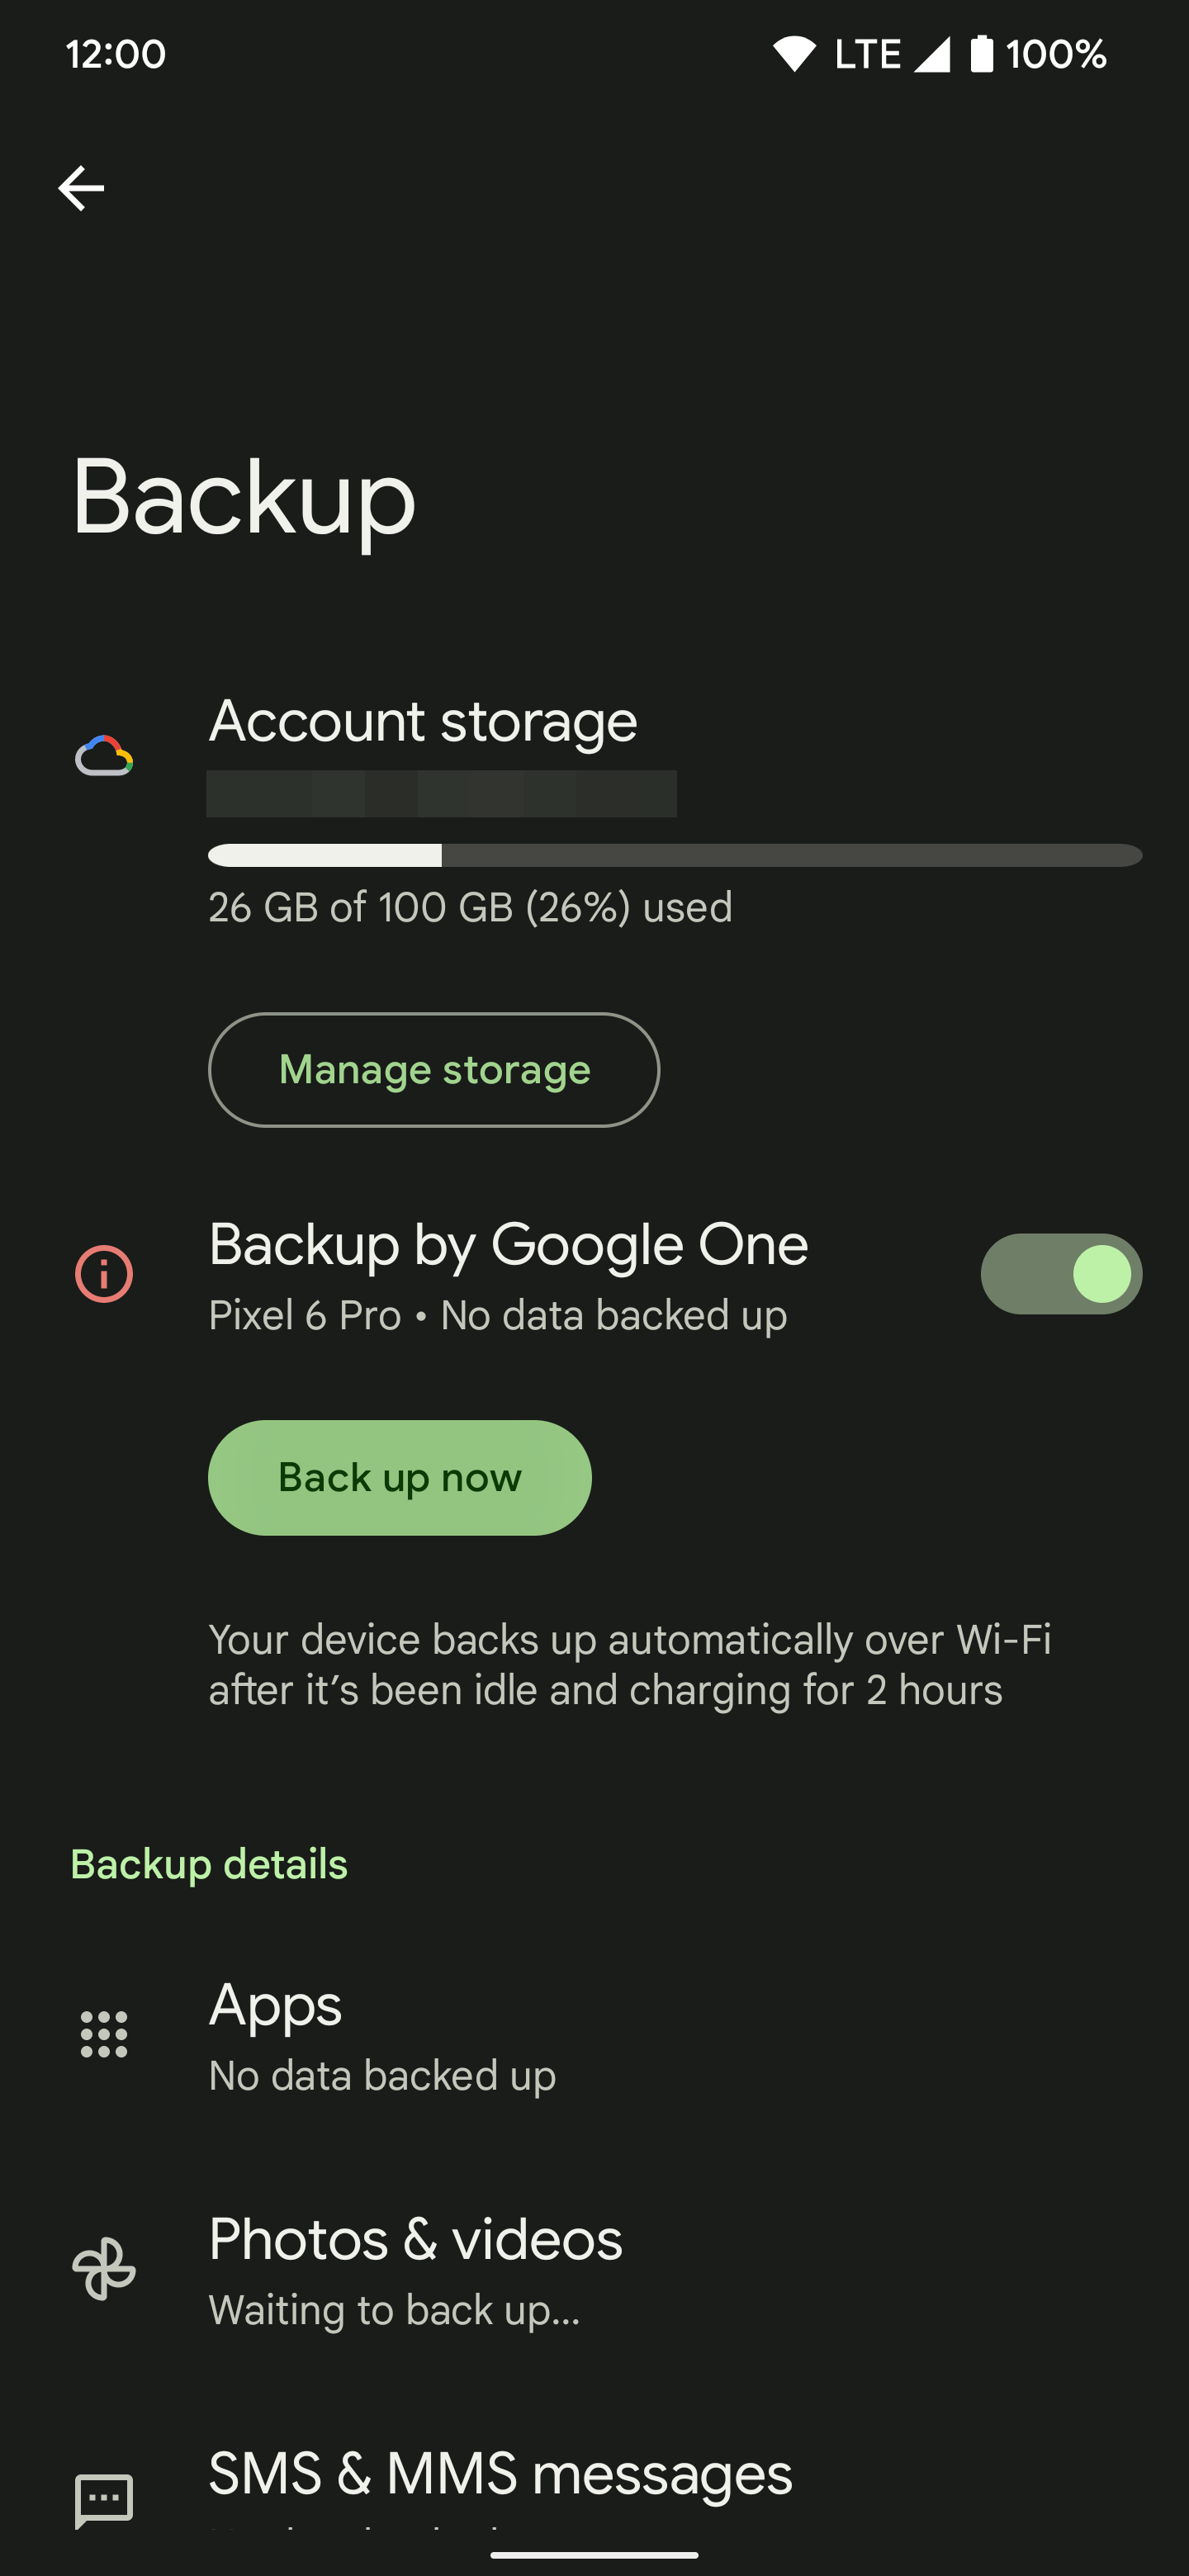 The main backup screen for backing data in the Google One app